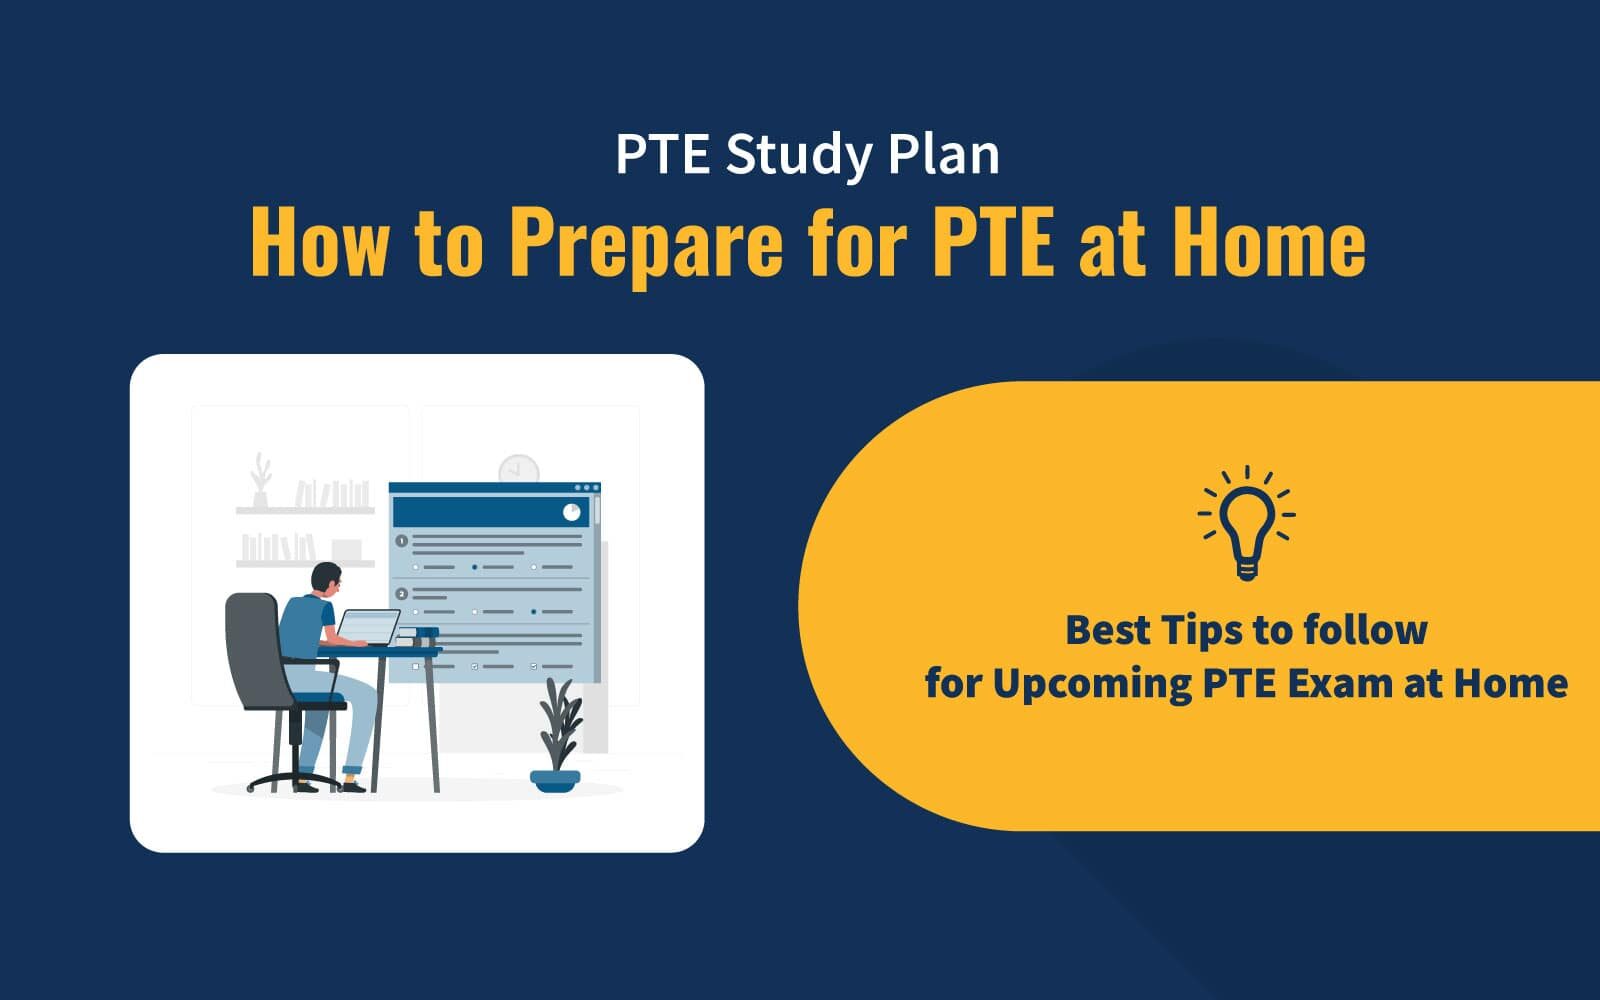 PTE Study Plan: How to Prepare for PTE at Home? image